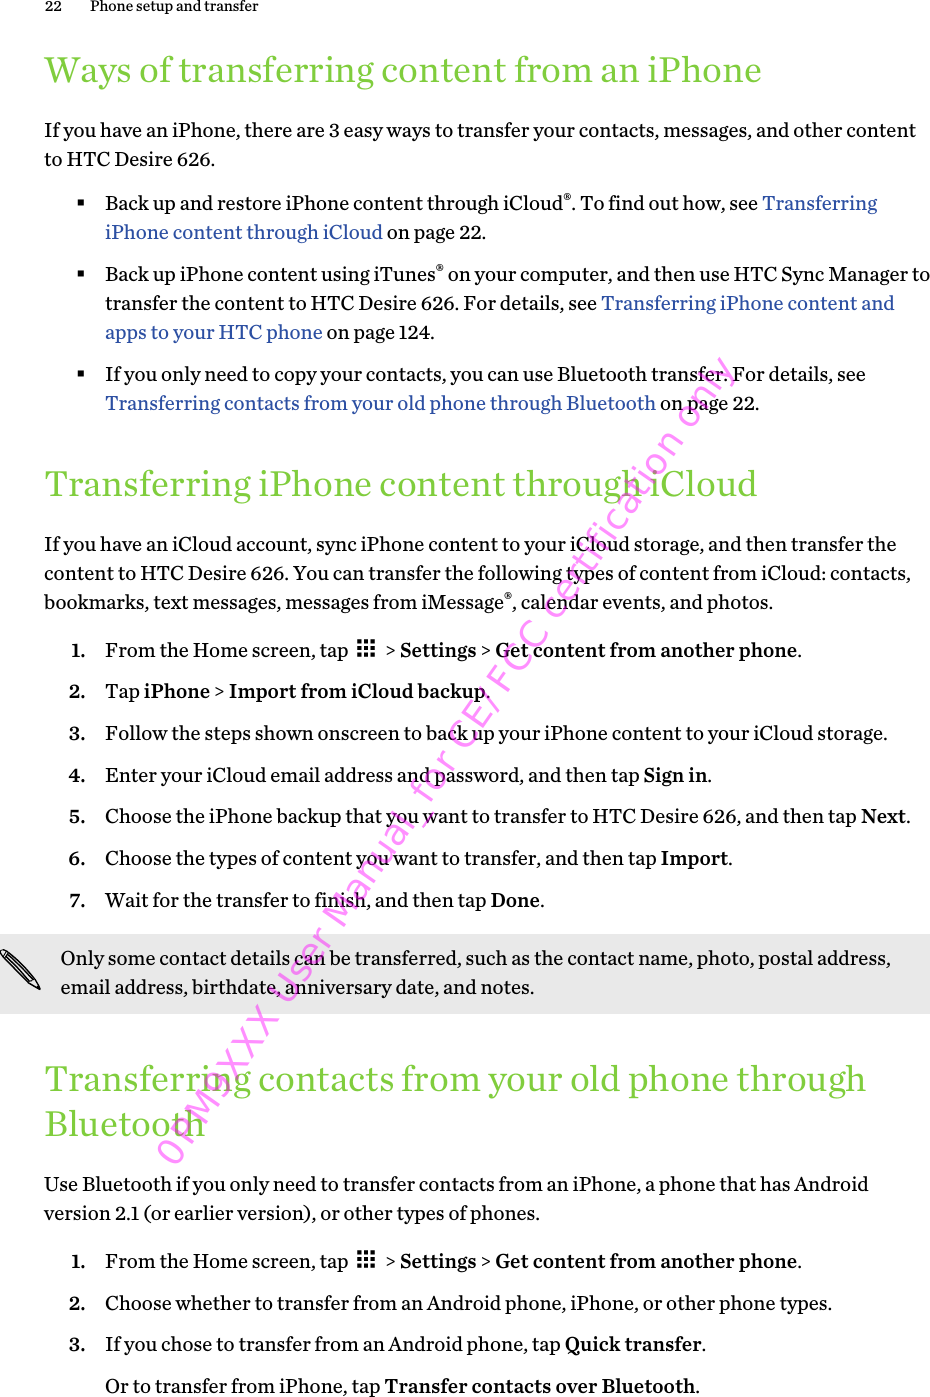 Ways of transferring content from an iPhoneIf you have an iPhone, there are 3 easy ways to transfer your contacts, messages, and other contentto HTC Desire 626.§Back up and restore iPhone content through iCloud®. To find out how, see TransferringiPhone content through iCloud on page 22.§Back up iPhone content using iTunes® on your computer, and then use HTC Sync Manager totransfer the content to HTC Desire 626. For details, see Transferring iPhone content andapps to your HTC phone on page 124.§If you only need to copy your contacts, you can use Bluetooth transfer. For details, see Transferring contacts from your old phone through Bluetooth on page 22.Transferring iPhone content through iCloudIf you have an iCloud account, sync iPhone content to your iCloud storage, and then transfer thecontent to HTC Desire 626. You can transfer the following types of content from iCloud: contacts,bookmarks, text messages, messages from iMessage®, calendar events, and photos.1. From the Home screen, tap   &gt; Settings &gt; Get content from another phone.2. Tap iPhone &gt; Import from iCloud backup.3. Follow the steps shown onscreen to back up your iPhone content to your iCloud storage.4. Enter your iCloud email address and password, and then tap Sign in.5. Choose the iPhone backup that you want to transfer to HTC Desire 626, and then tap Next.6. Choose the types of content you want to transfer, and then tap Import.7. Wait for the transfer to finish, and then tap Done.Only some contact details can be transferred, such as the contact name, photo, postal address,email address, birthdate, anniversary date, and notes.Transferring contacts from your old phone throughBluetoothUse Bluetooth if you only need to transfer contacts from an iPhone, a phone that has Androidversion 2.1 (or earlier version), or other types of phones.1. From the Home screen, tap   &gt; Settings &gt; Get content from another phone.2. Choose whether to transfer from an Android phone, iPhone, or other phone types.3. If you chose to transfer from an Android phone, tap Quick transfer. Or to transfer from iPhone, tap Transfer contacts over Bluetooth.22 Phone setup and transfer0PM9XXX User Manual_for CE/FCC certification only